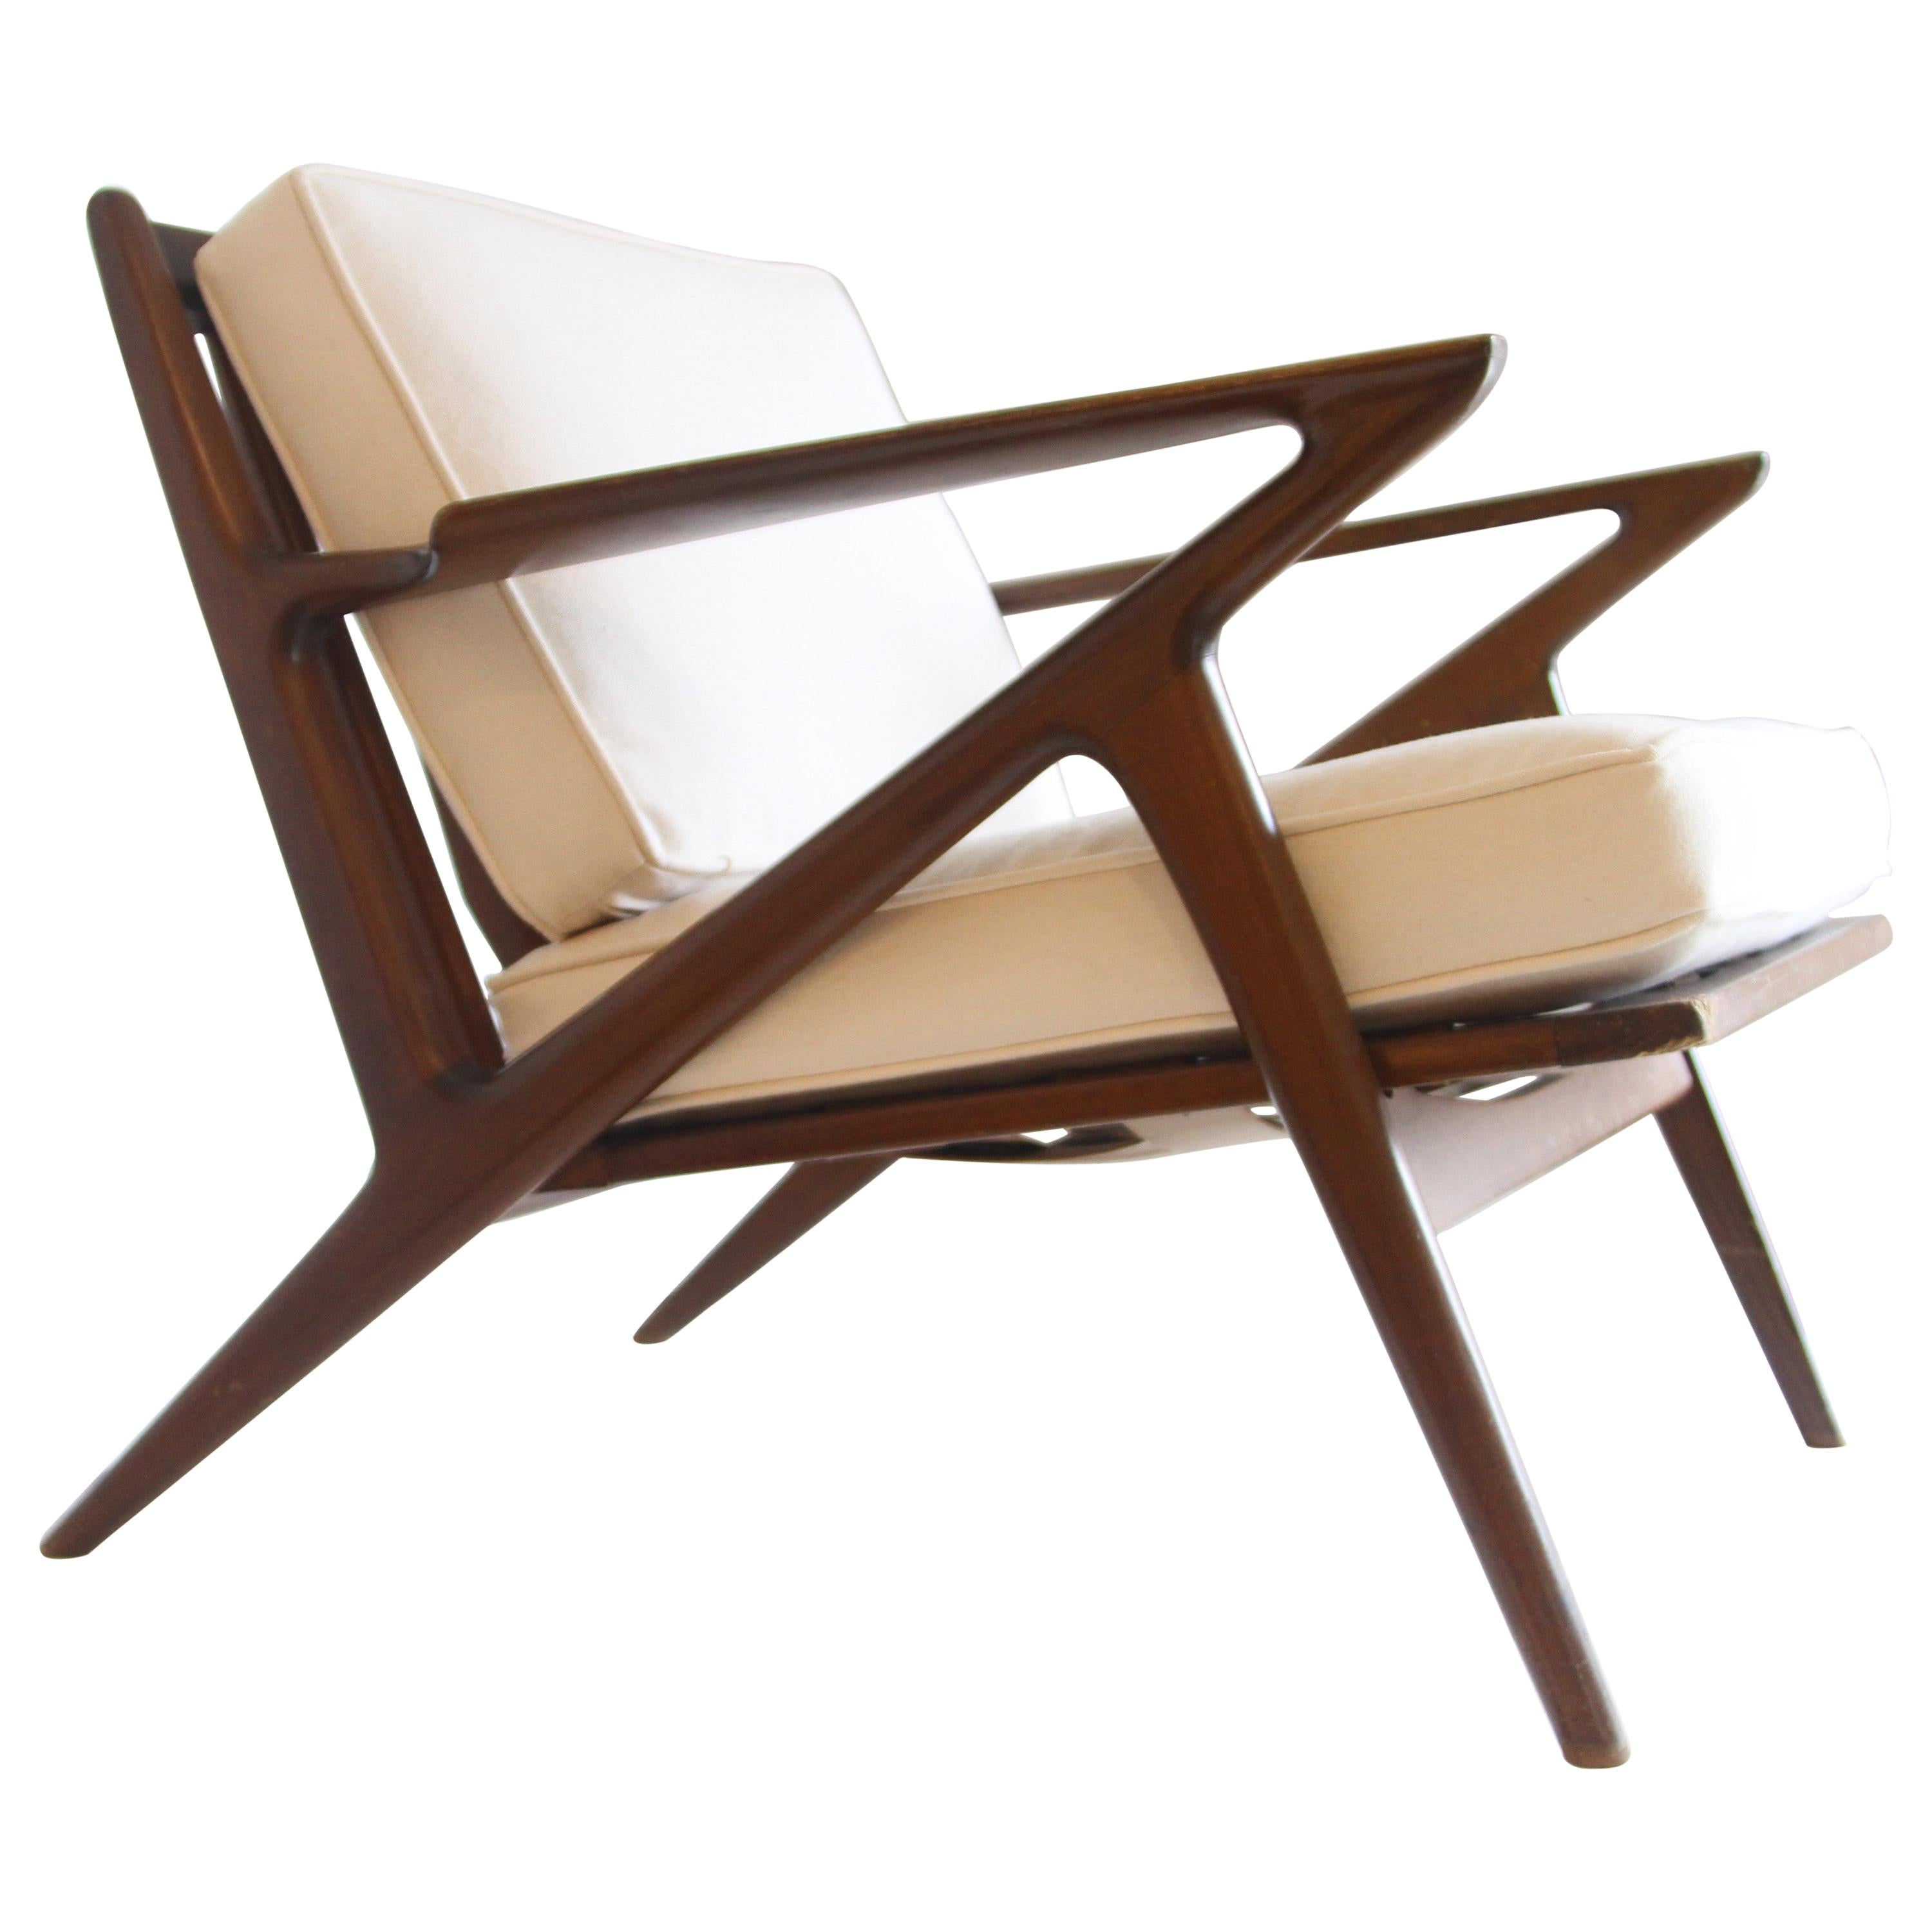 Pair of Mid-Century Modern Z Chair by Poul Jensen for Selig